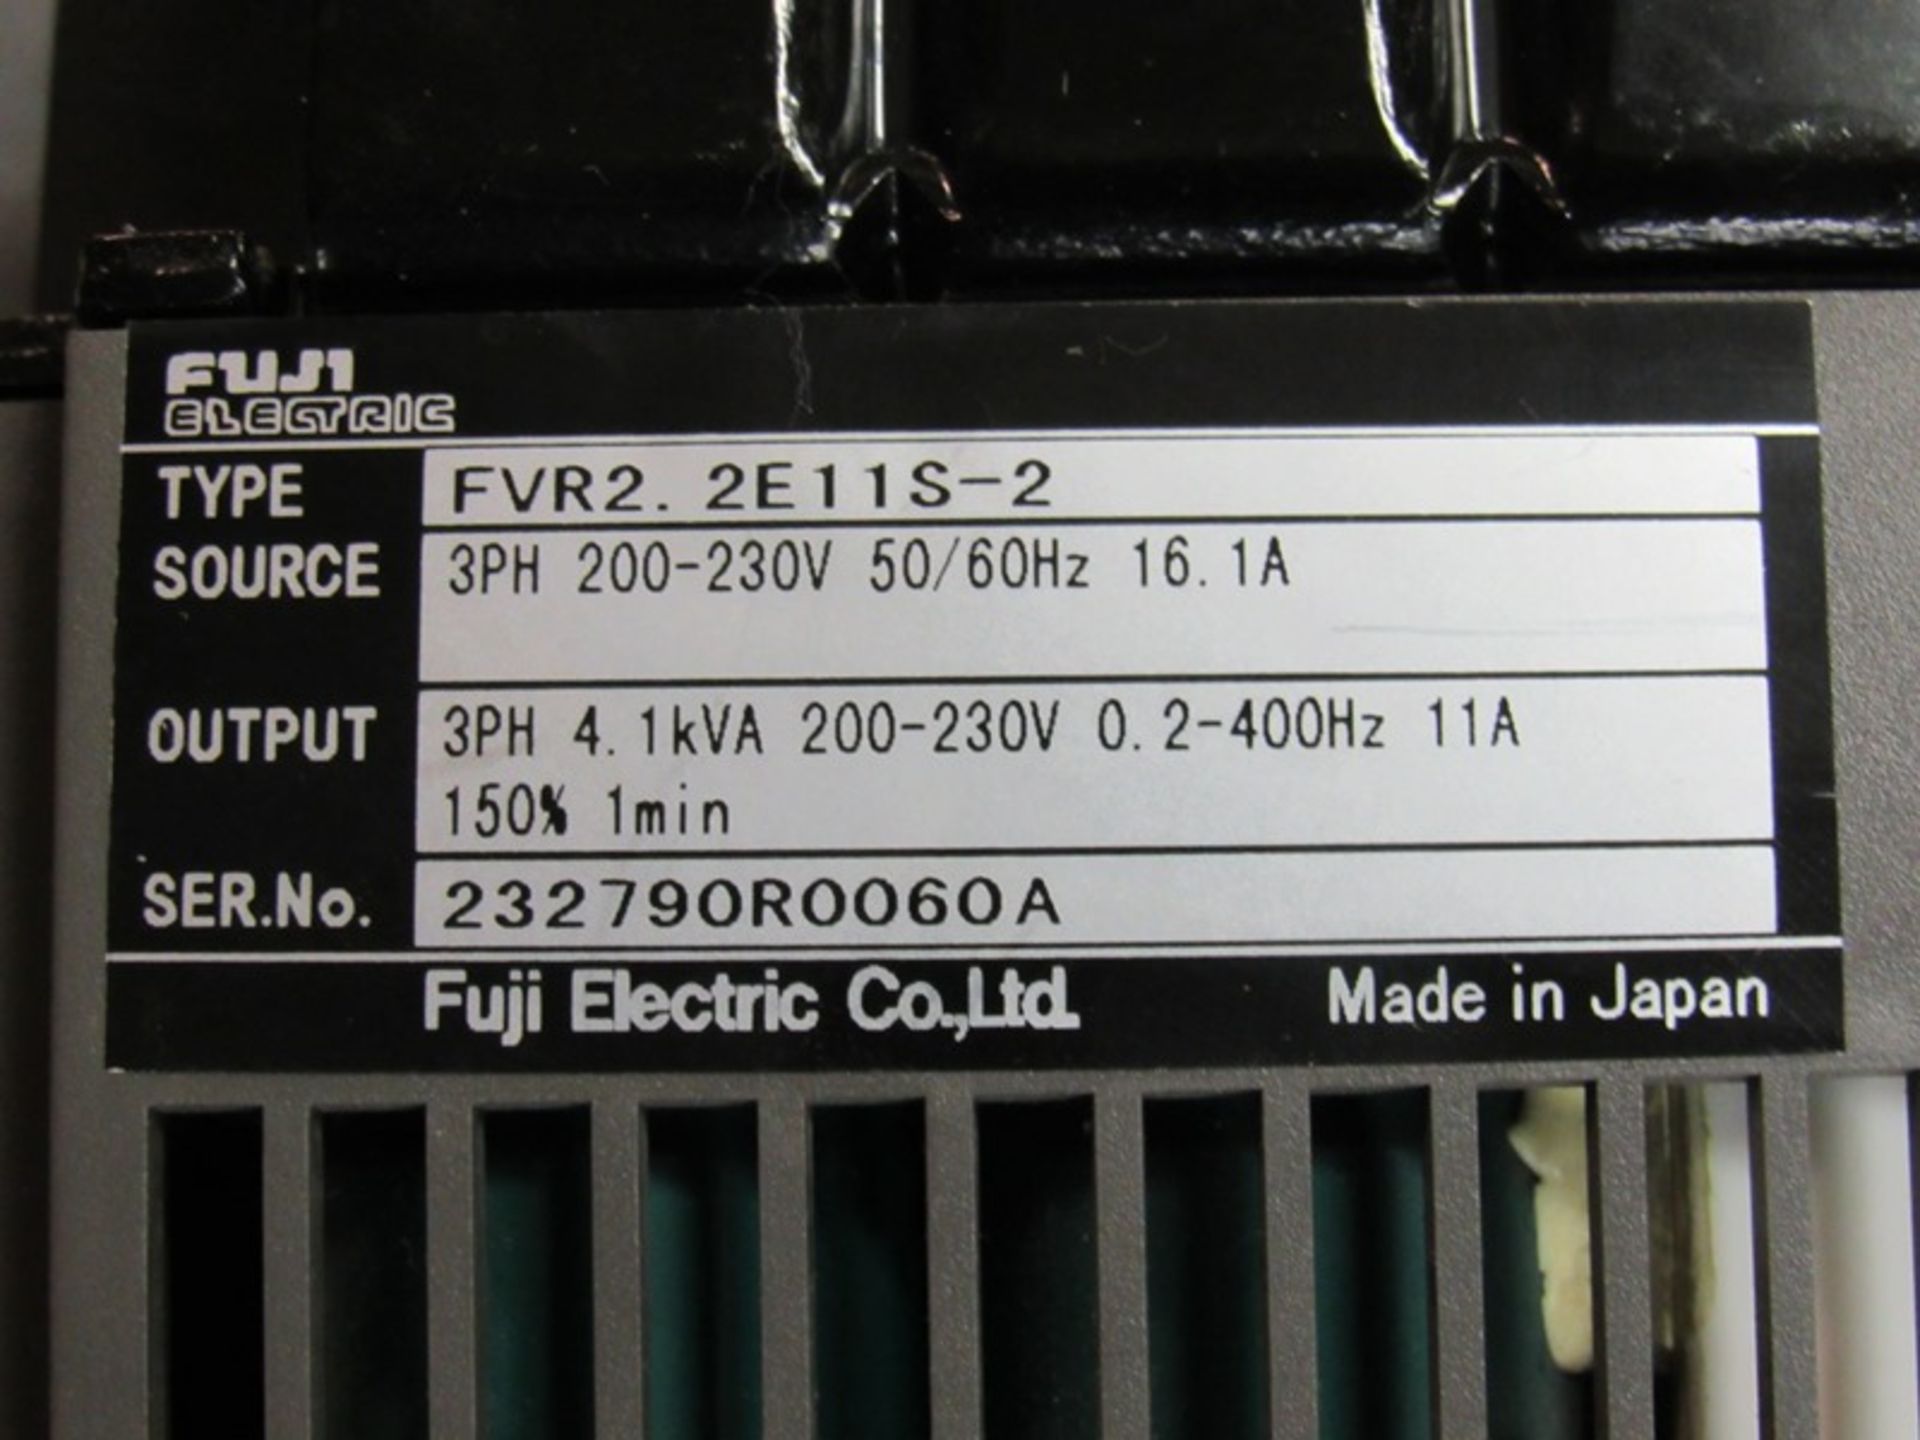 Fuji Mdl. FVR2.2E11S-2 AC Voltage Drive Inputs, 200-230 V, output 200-230 V (Required Loading Fee $ - Image 3 of 3